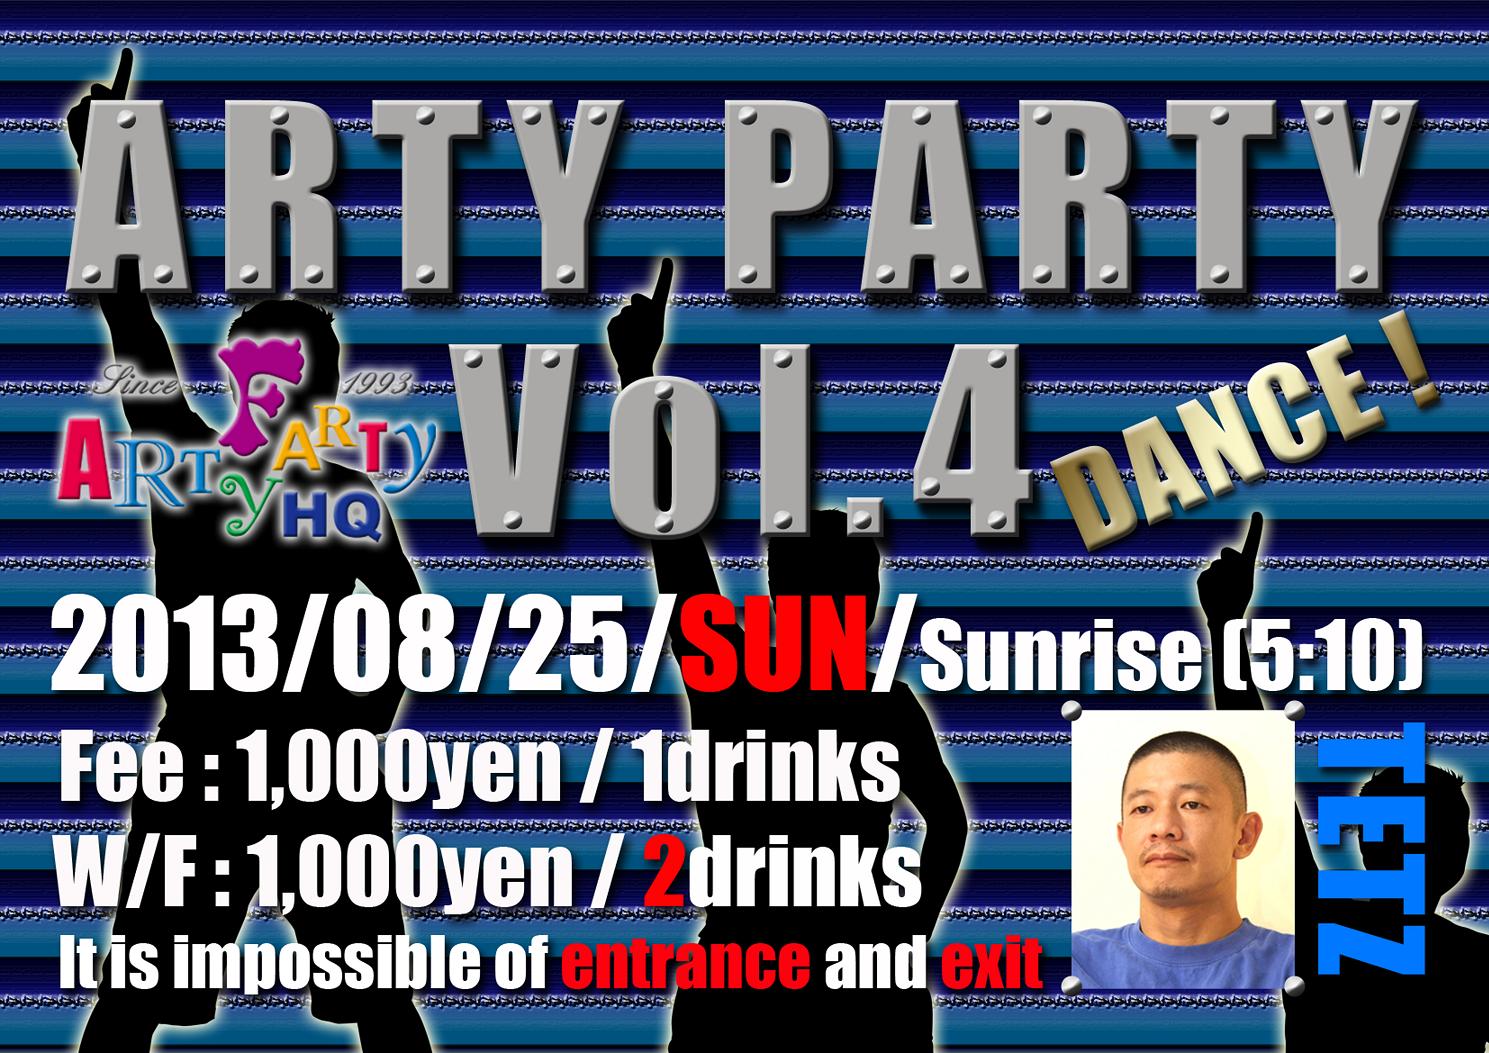 AFTER HOURS PARTY “ARTY PARTY”Vol.4 1489x1053 307kb